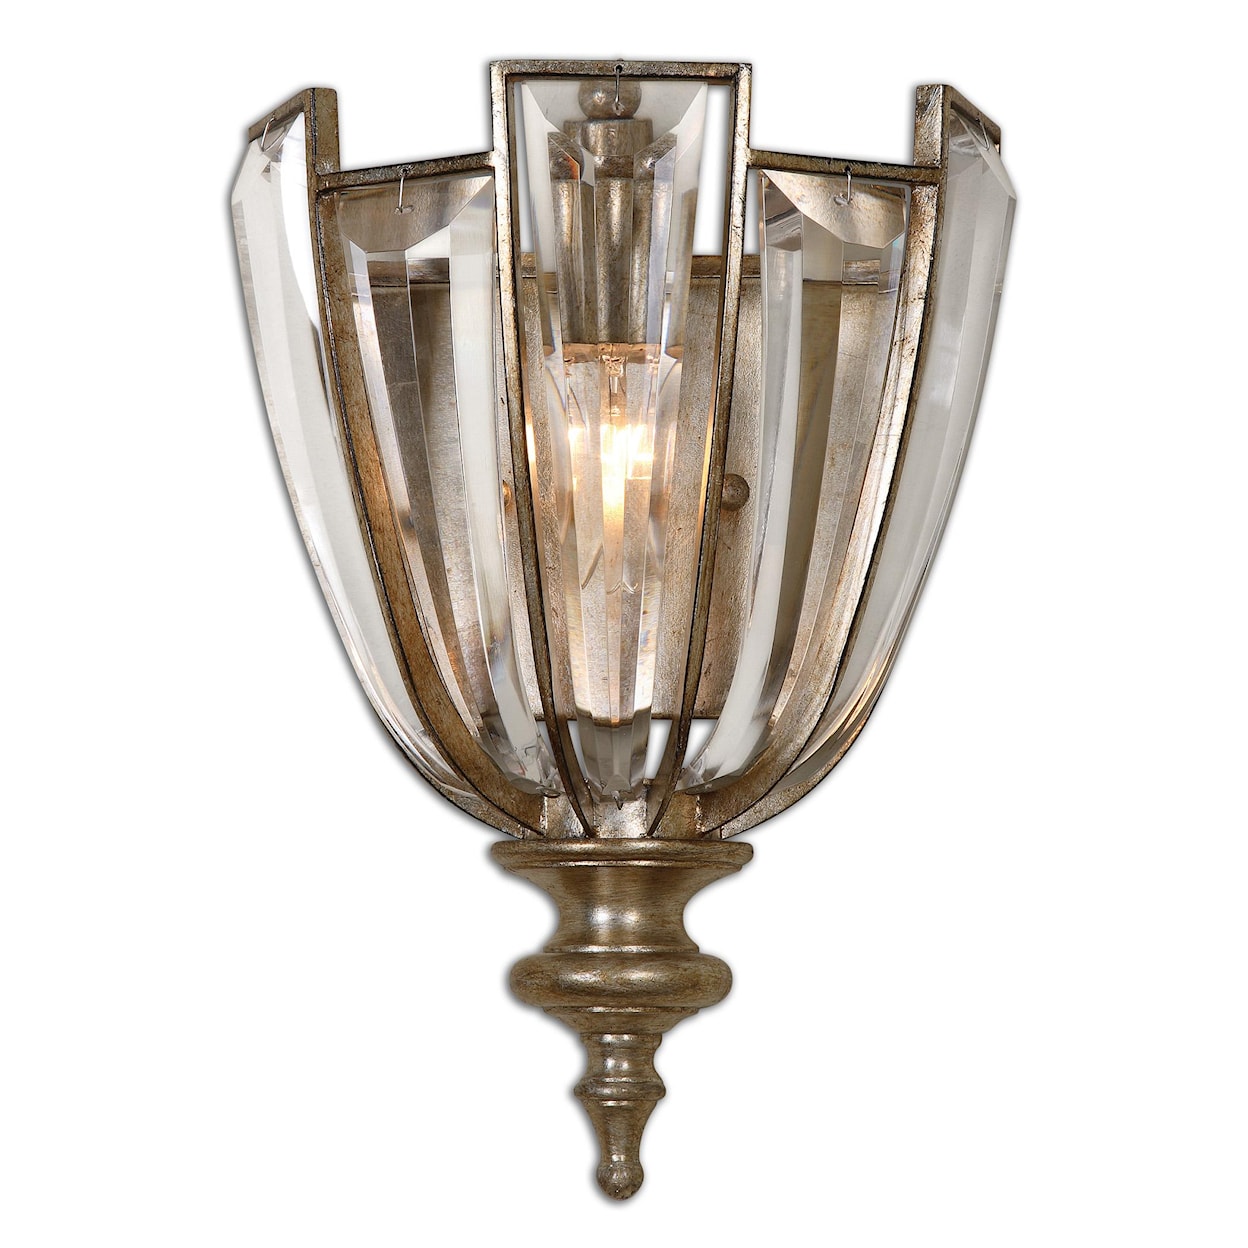 Uttermost Lighting Fixtures - Wall Sconces Uttermost Vicentina 1 Light Crystal Wall Sco